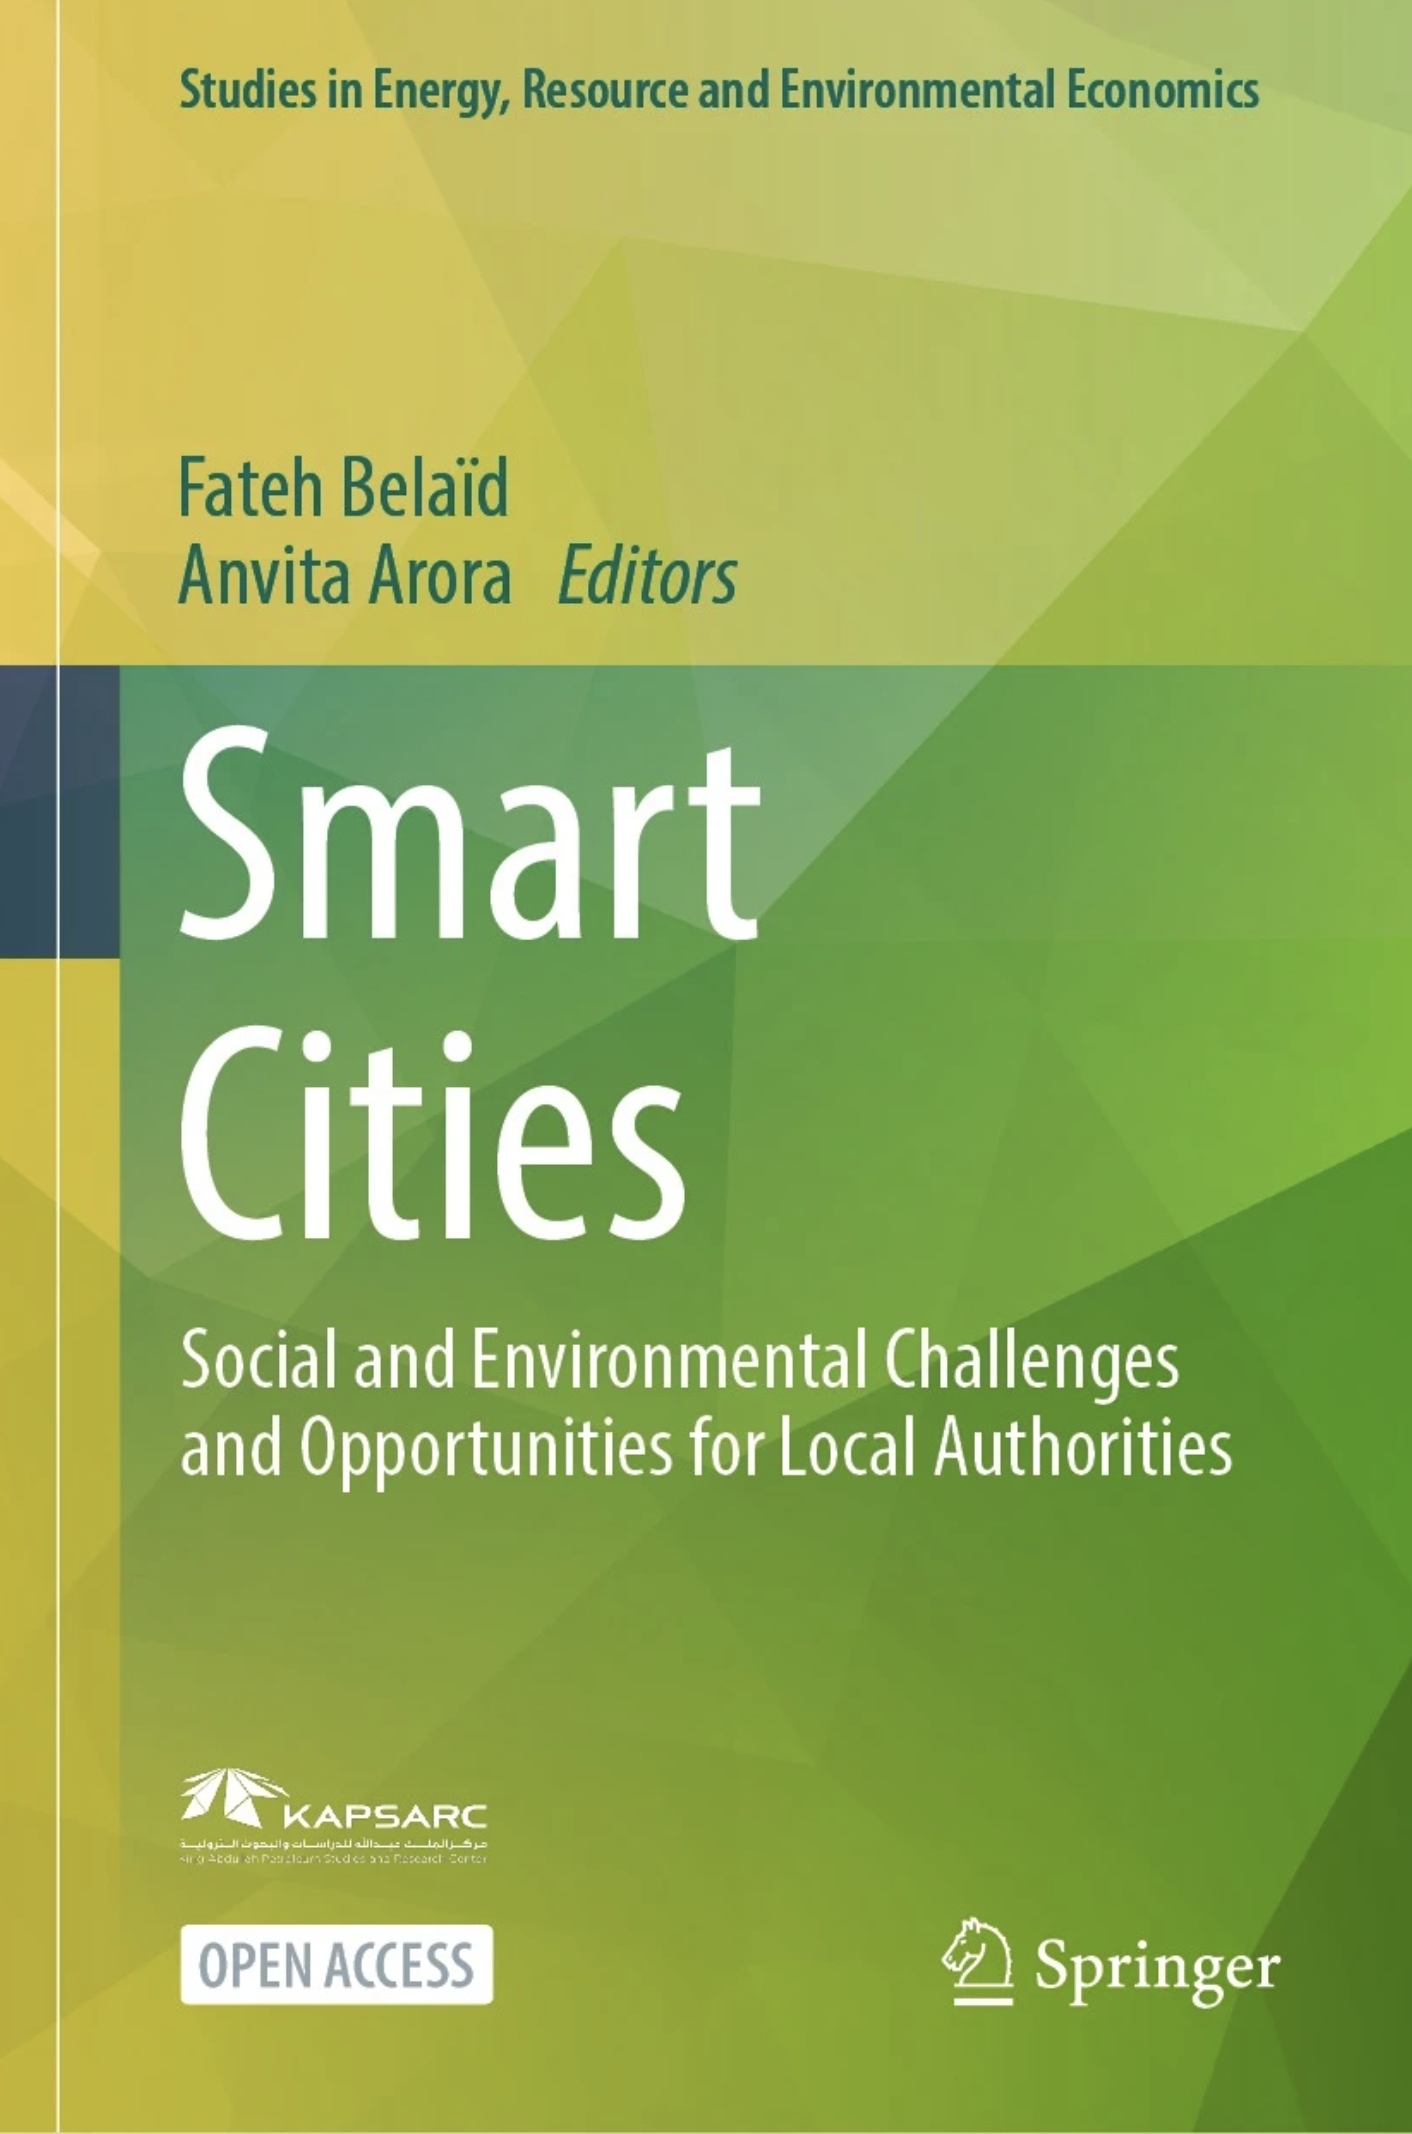 Smart Cities Initiatives and Perspectives in the MENA Region and Saudi Arabia